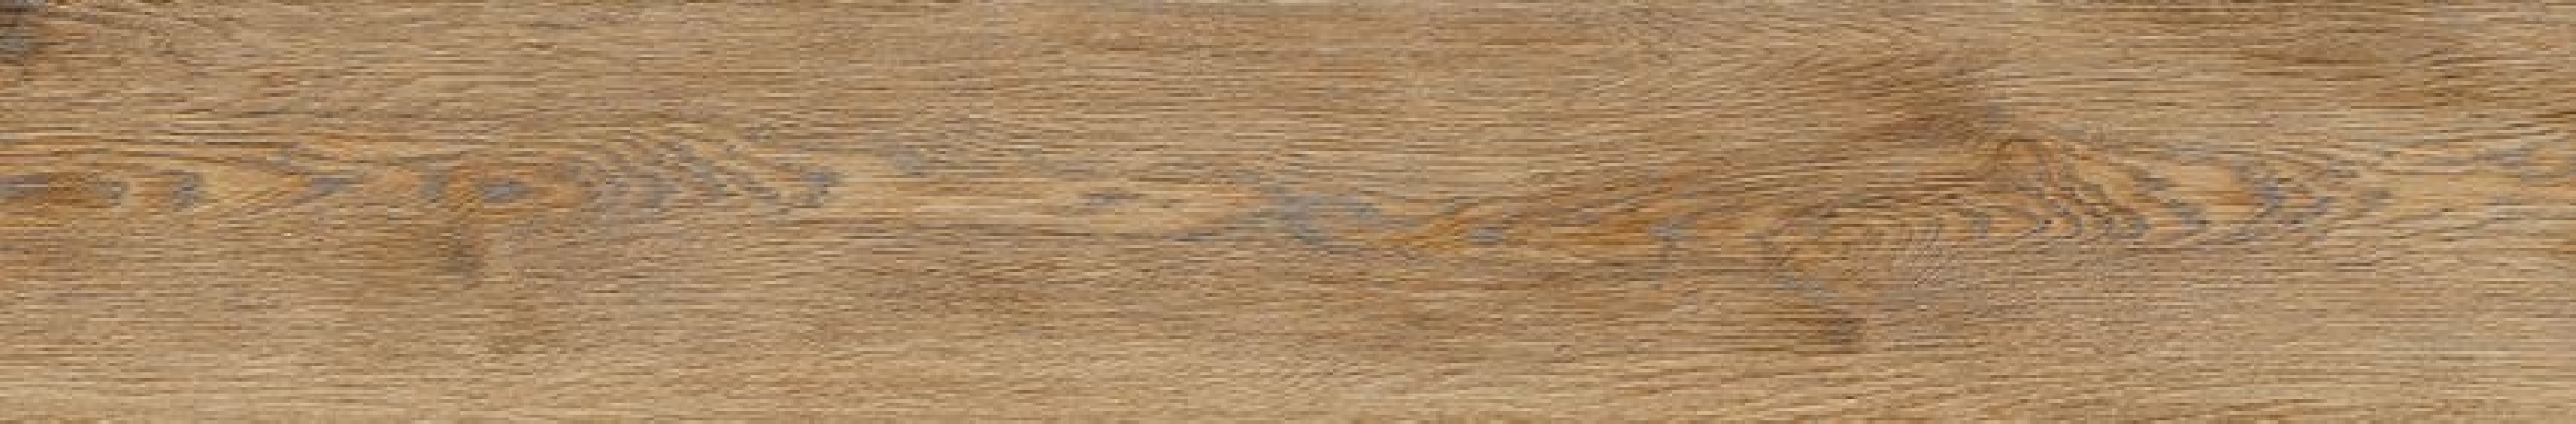 Opoczno Grand Wood Rustic Chocolate OP498-028-1